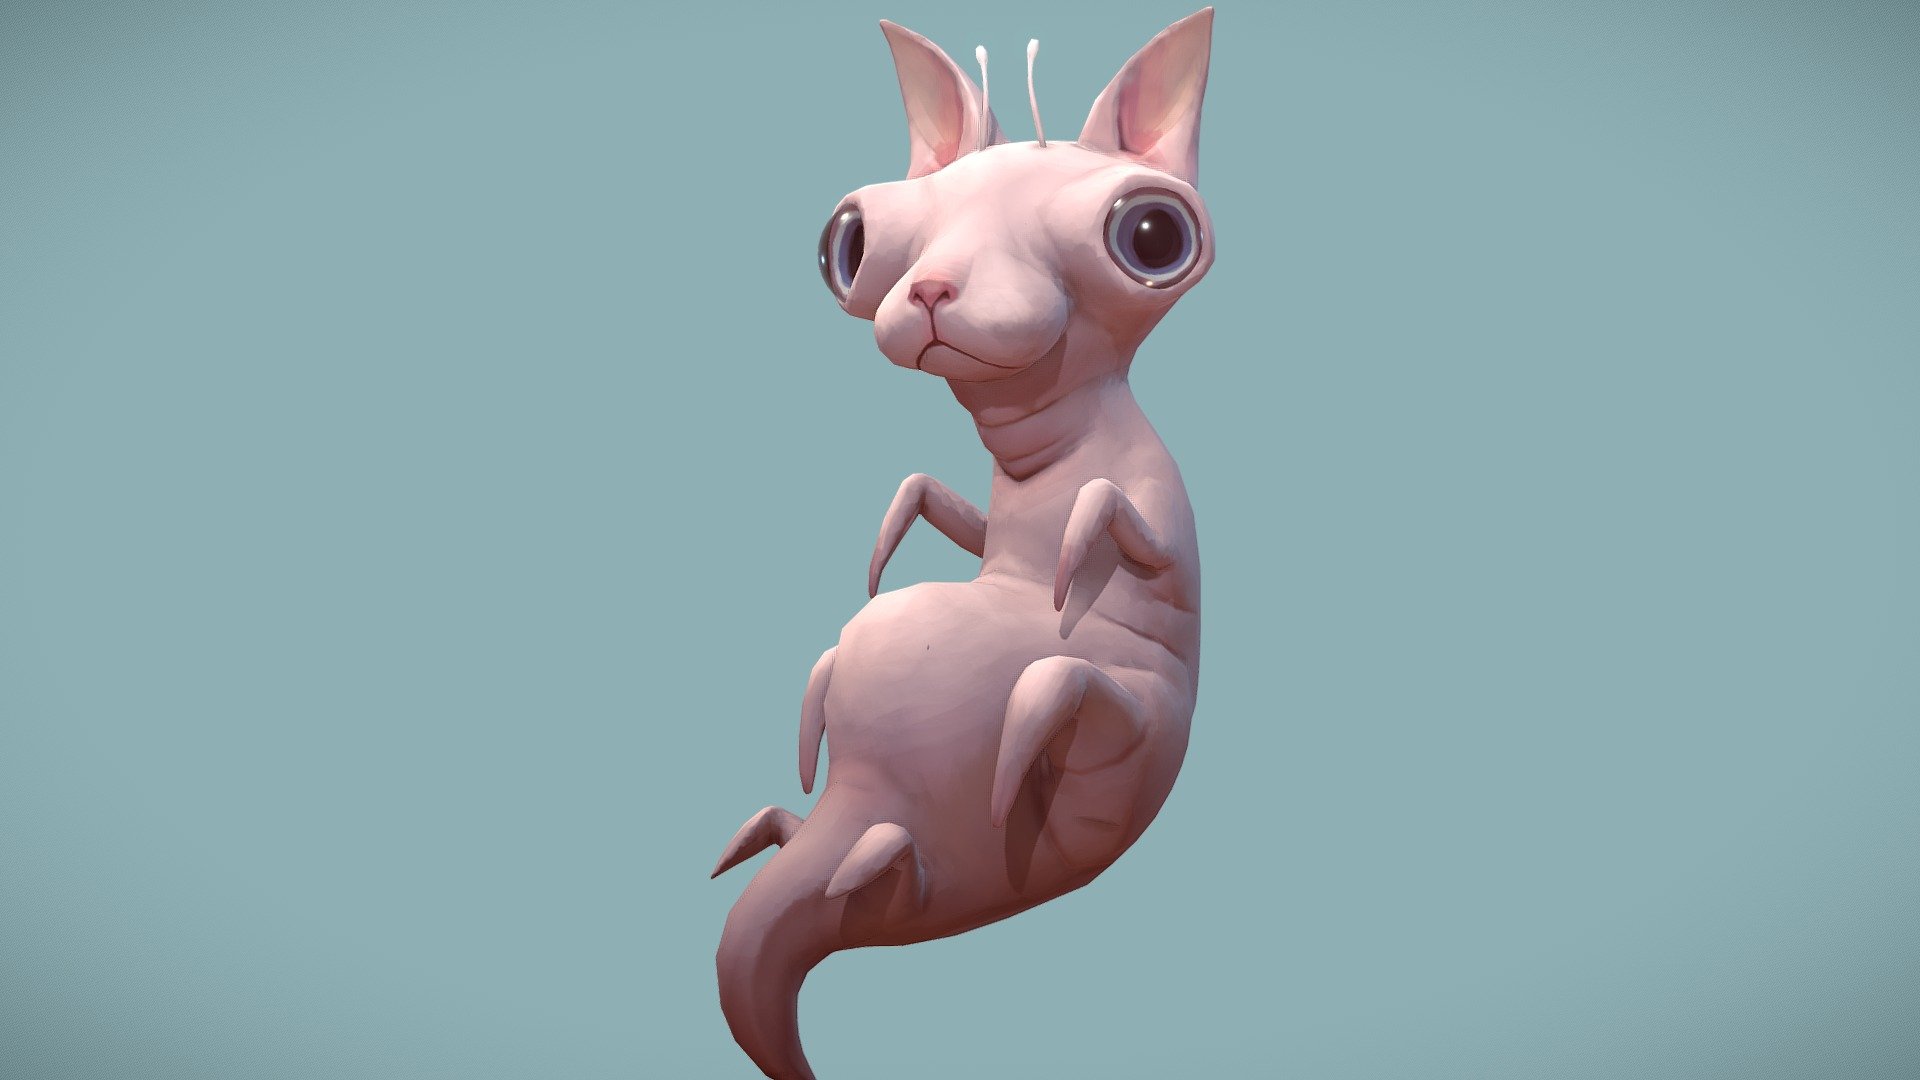 Based on an awesome concept by Tooth Wu: https://www.artstation.com/artwork/NGaQaz - CAT? - 3D model by Forild 3d model